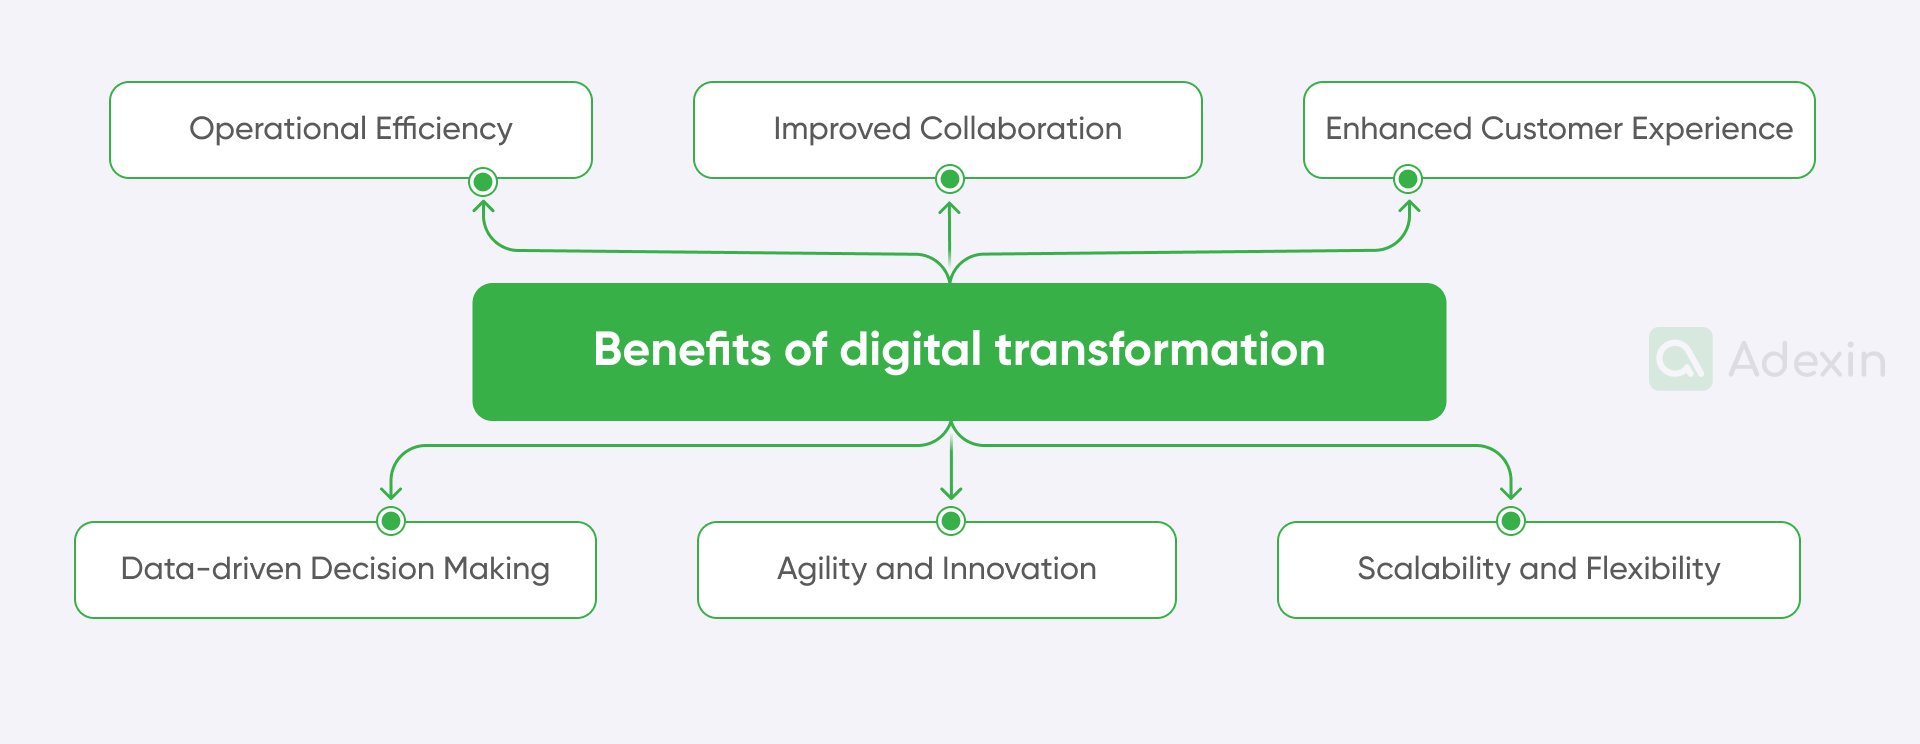 Components of benefits of digital transformation